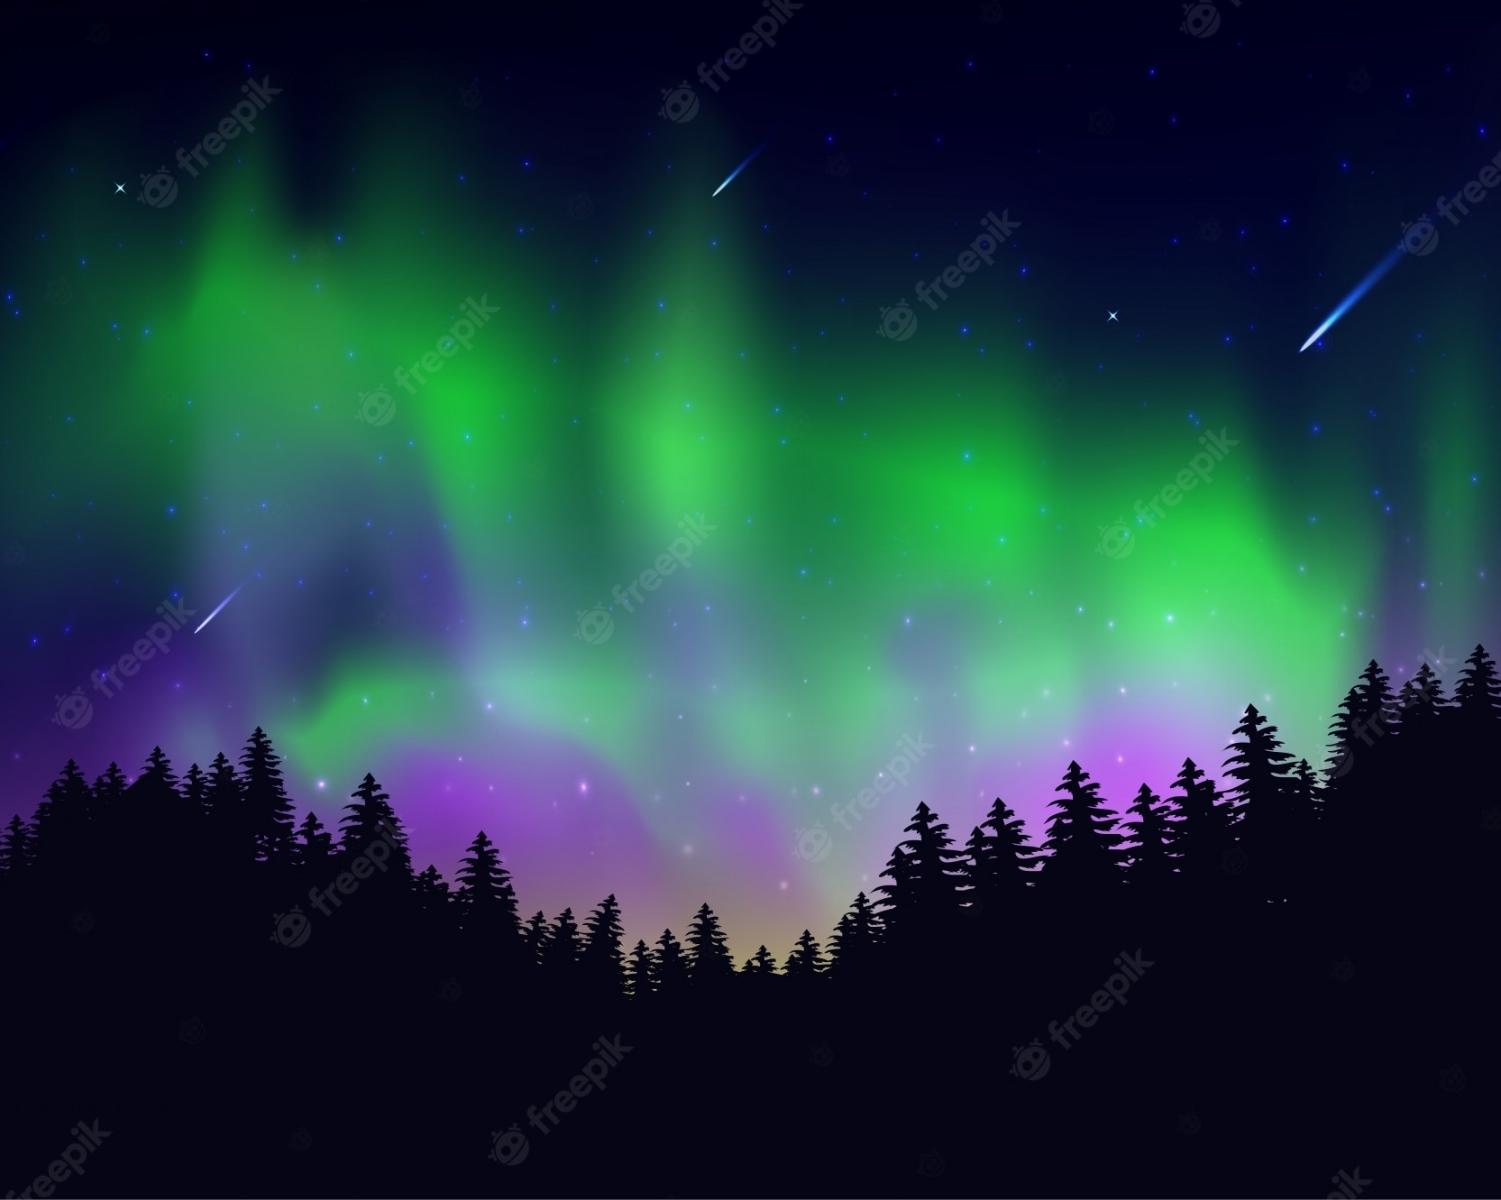 What causes the different colours in the aurora?